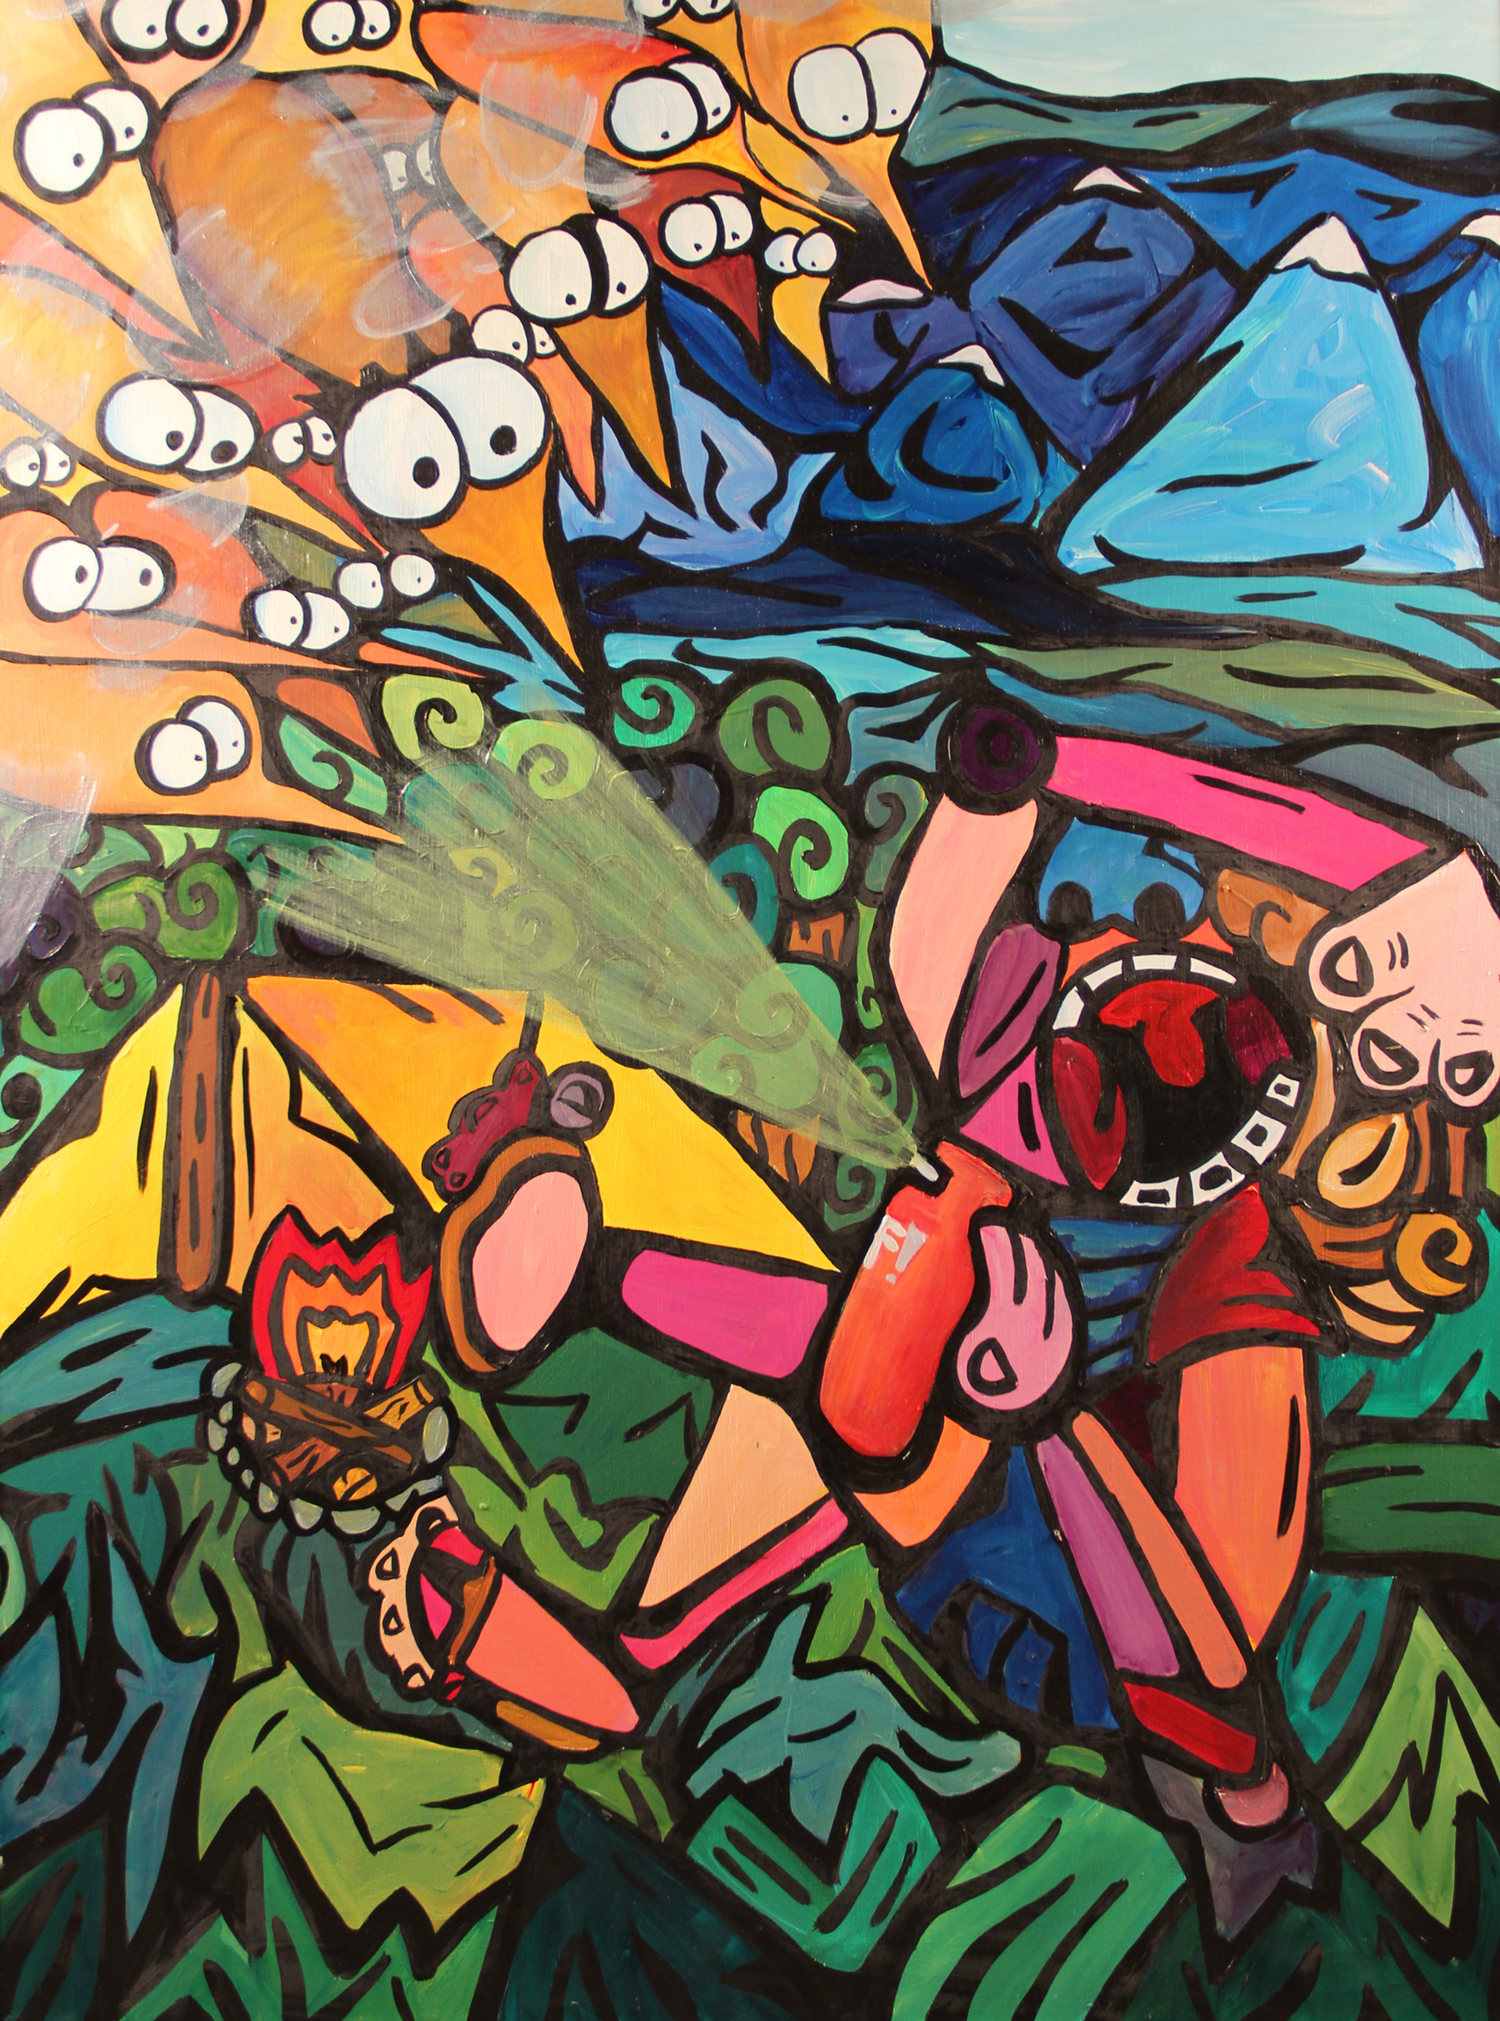 Abstract and colorful painting of an anguished figure camping surrounded by staring mice. Painting by Courtney Huston